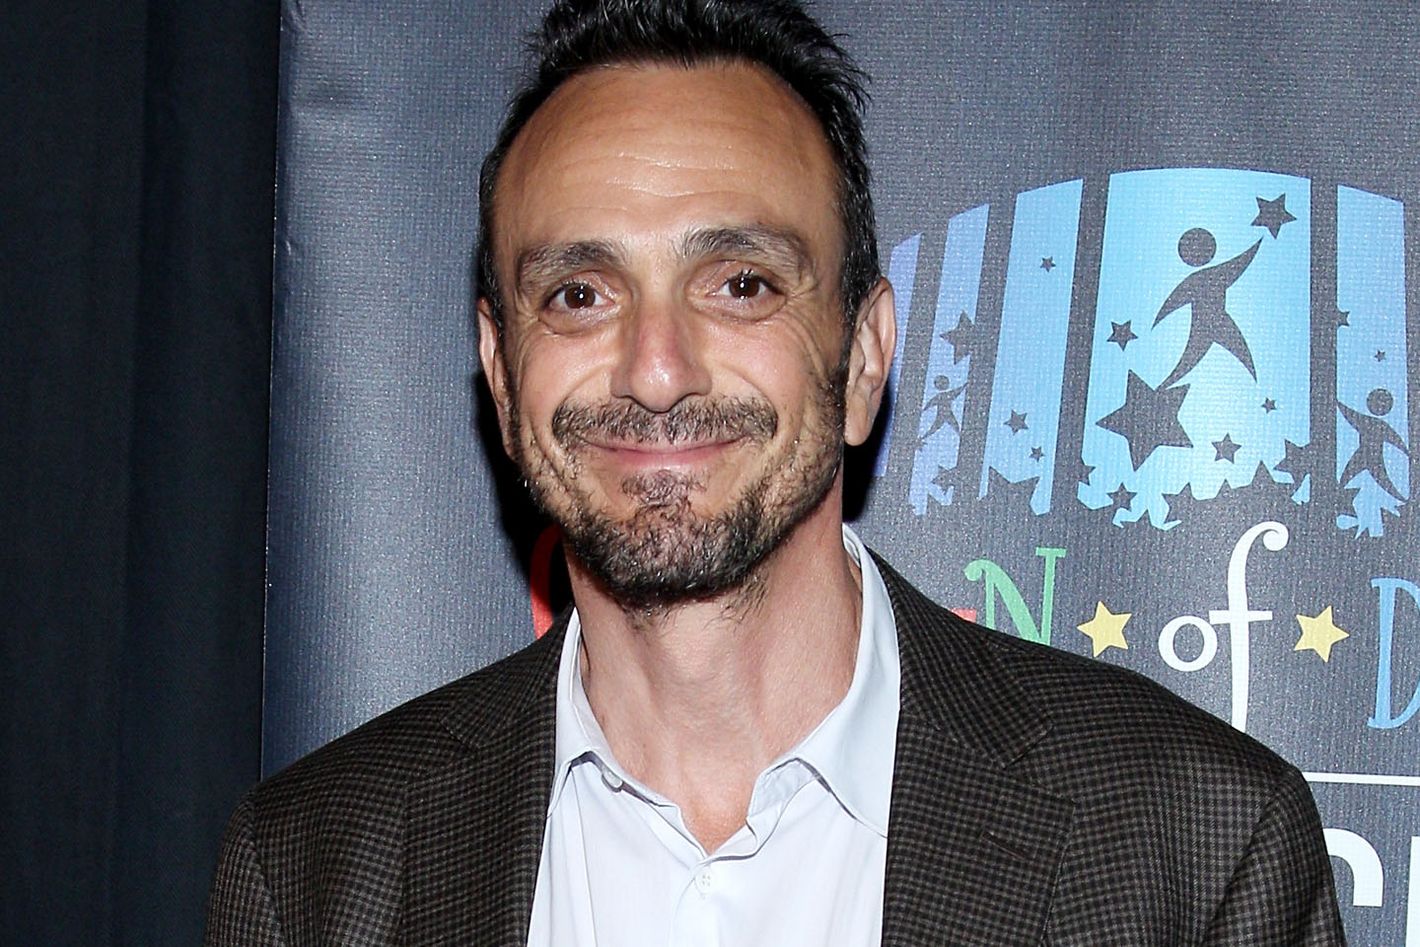 Know About Hank Azaria's Net Worth, Early Life, And Career!